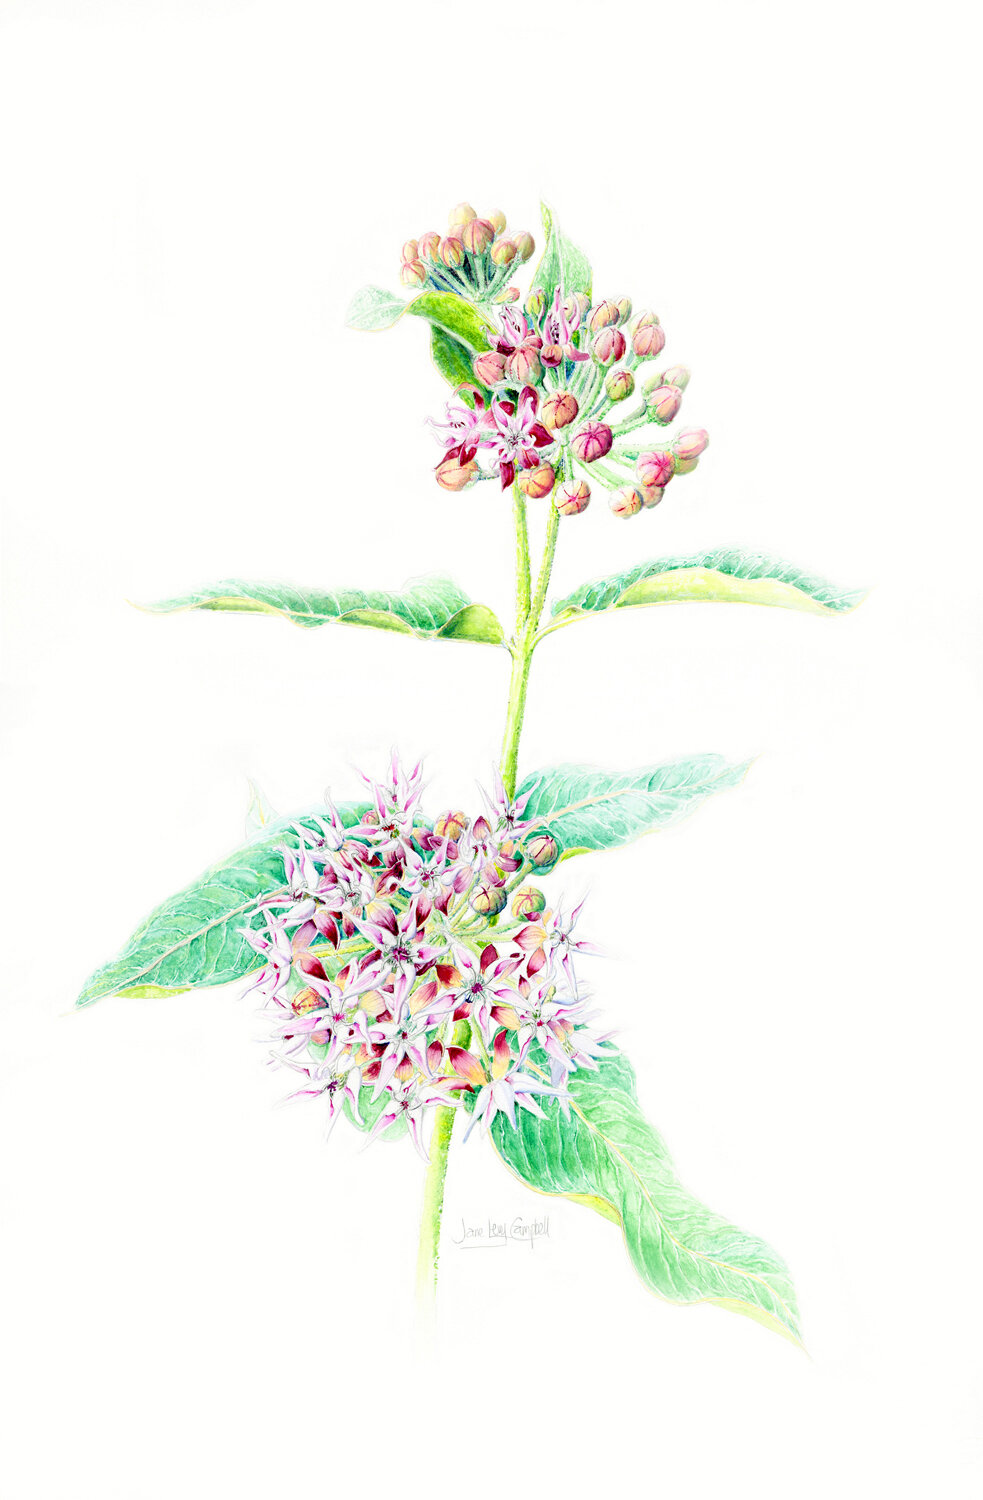 Showy Milkweed by Jane Levy Campbell